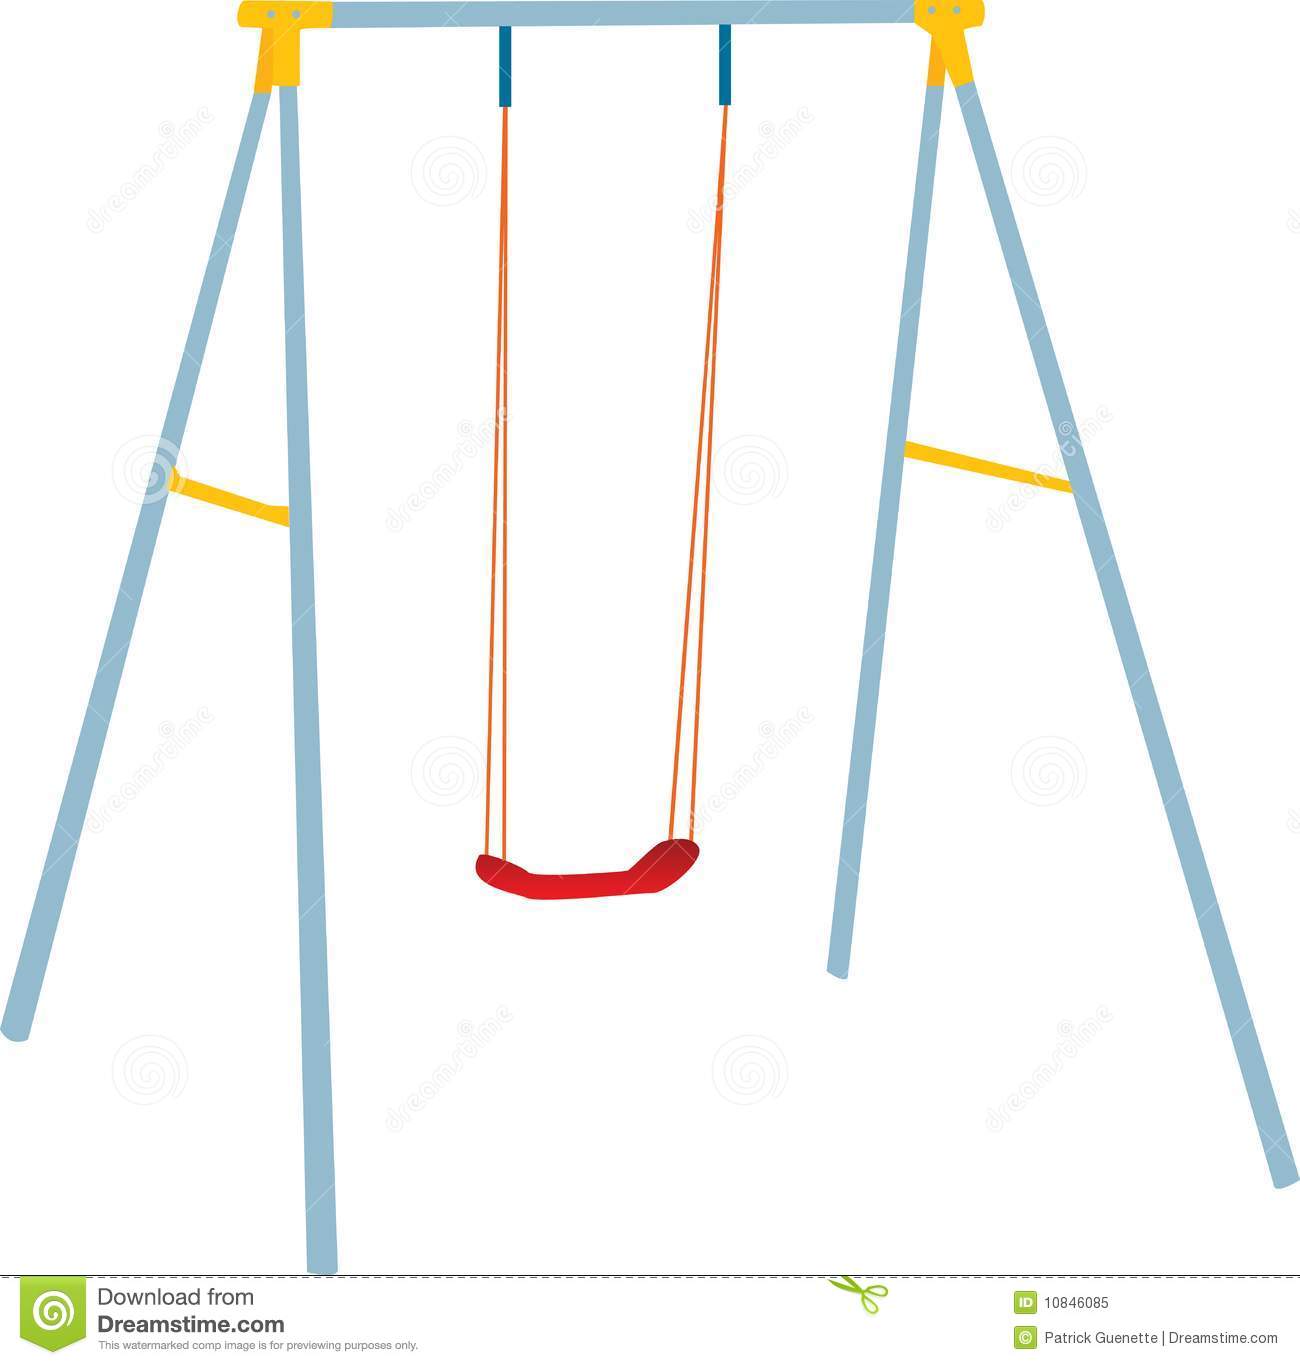 Children Swing Set Outdoor Play  Royalty Free Stock Photo   Image